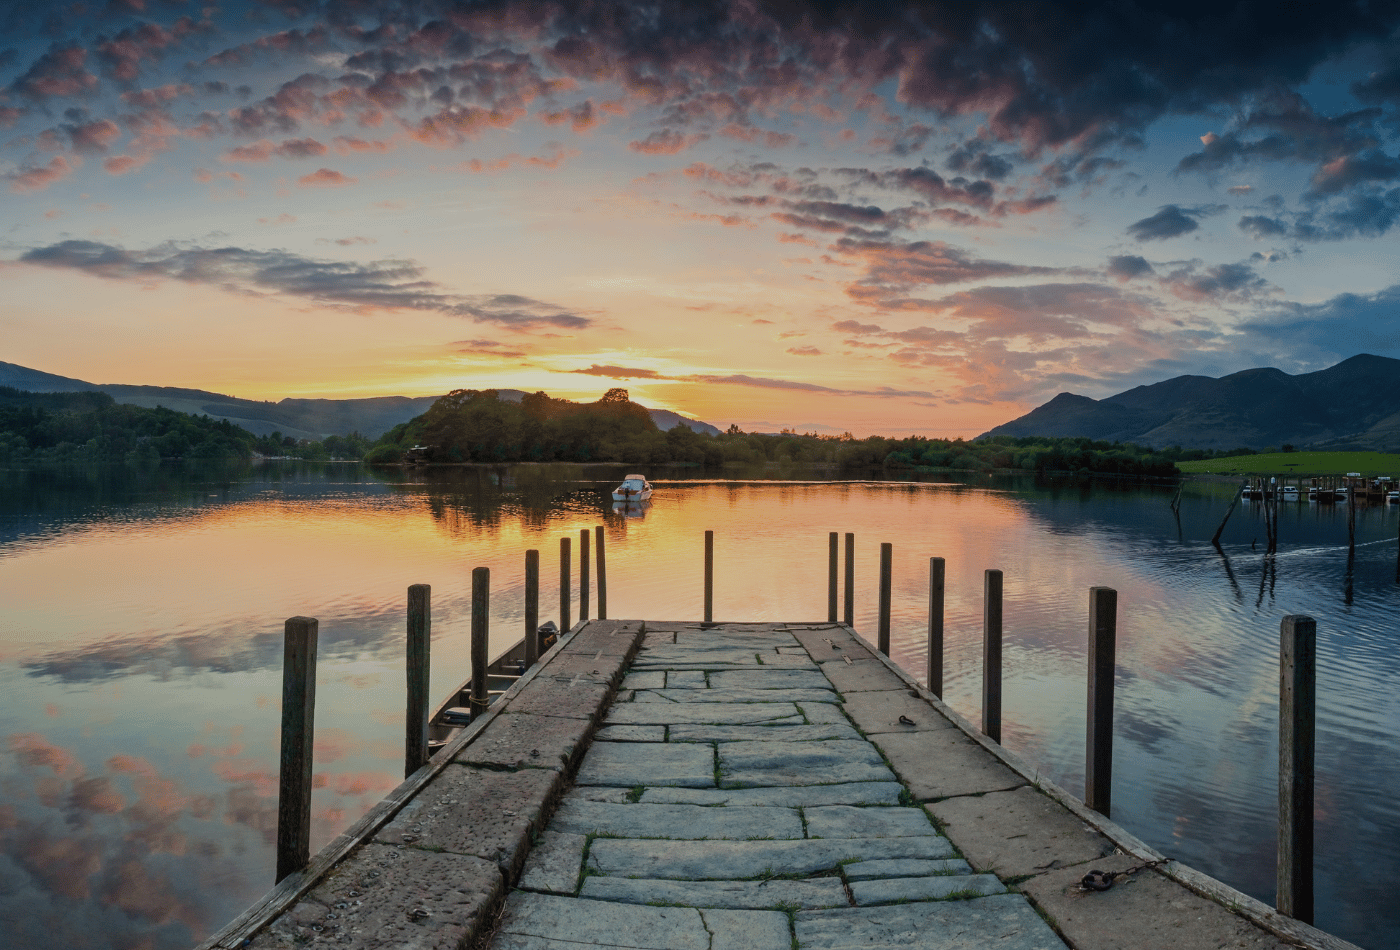 A jetty leading to a lake, with a dazzling sunset in the Lake District.